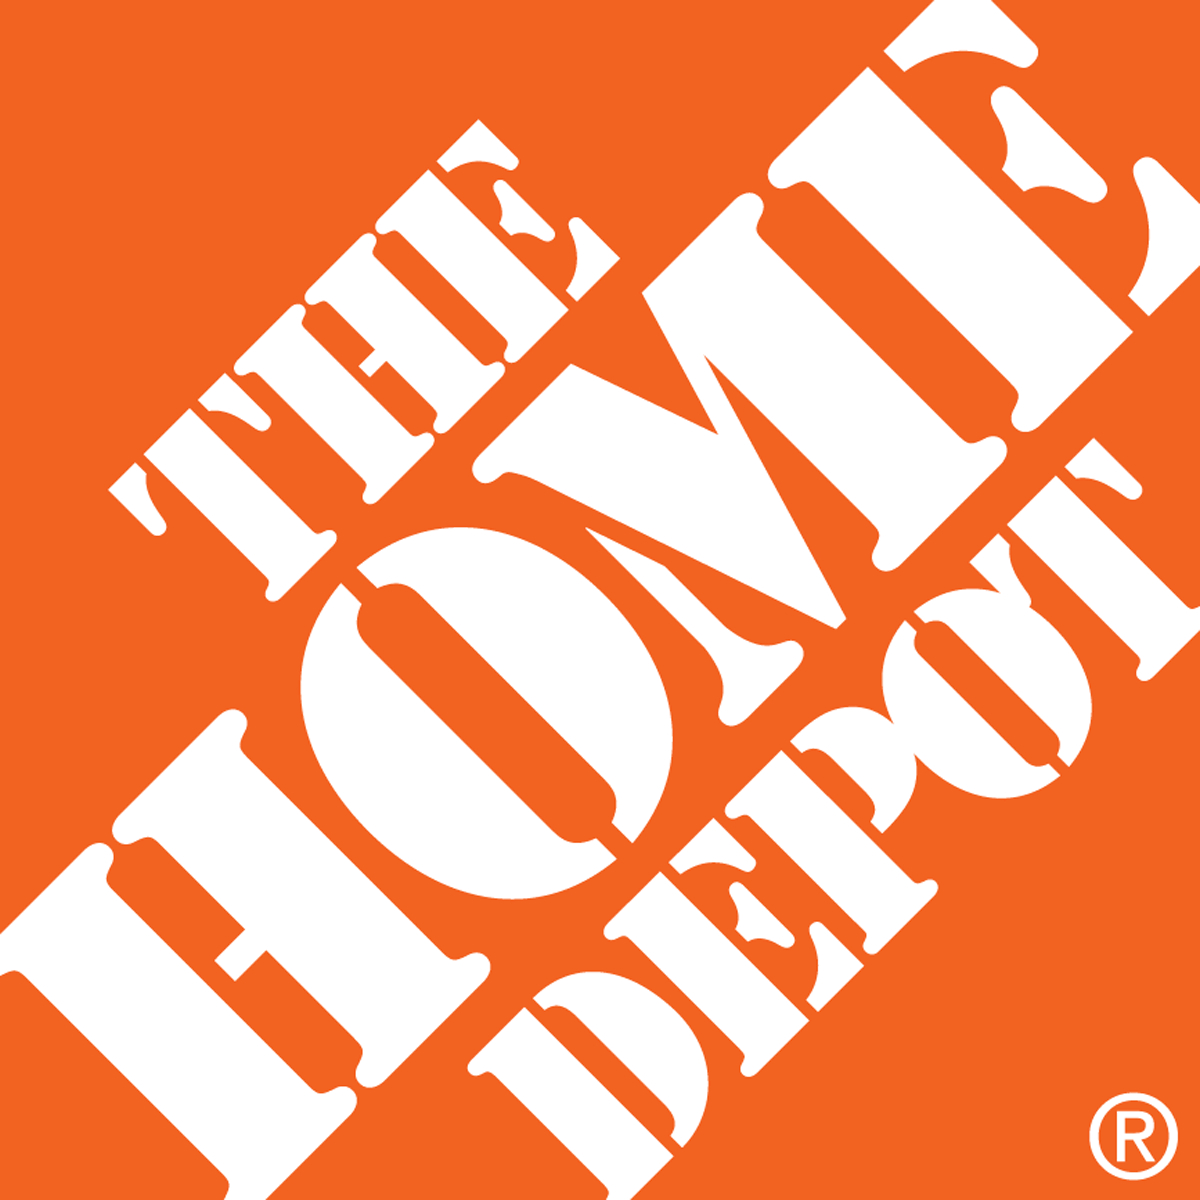 20% Off Home Depot Coupons, Promo Codes &amp;amp; Deals 2019 - Savings - Free Printable Home Depot Coupons